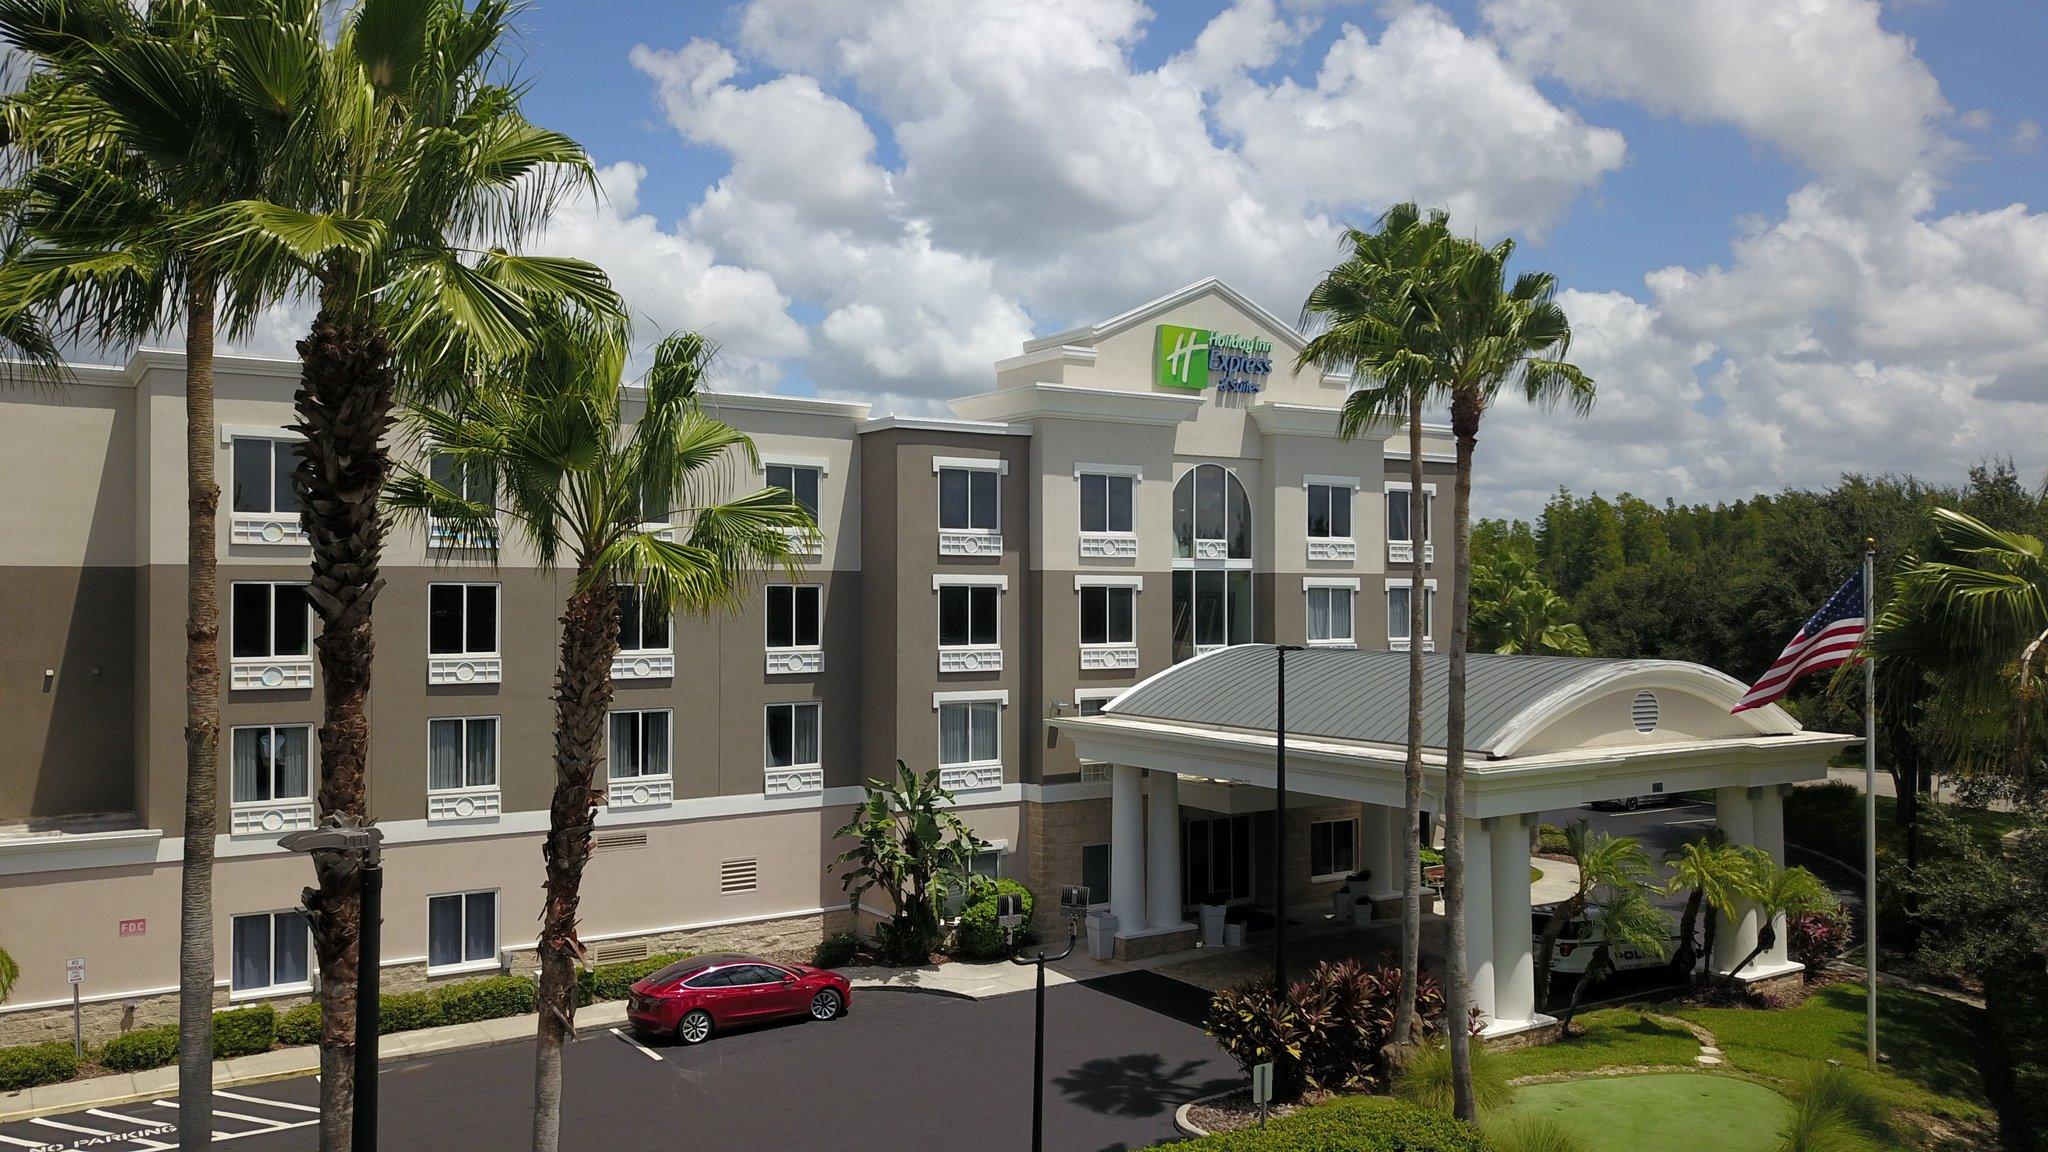 Holiday Inn Express Hotel & Suites Tampa-I-75 at Bruce B. Downs in Tampa, FL